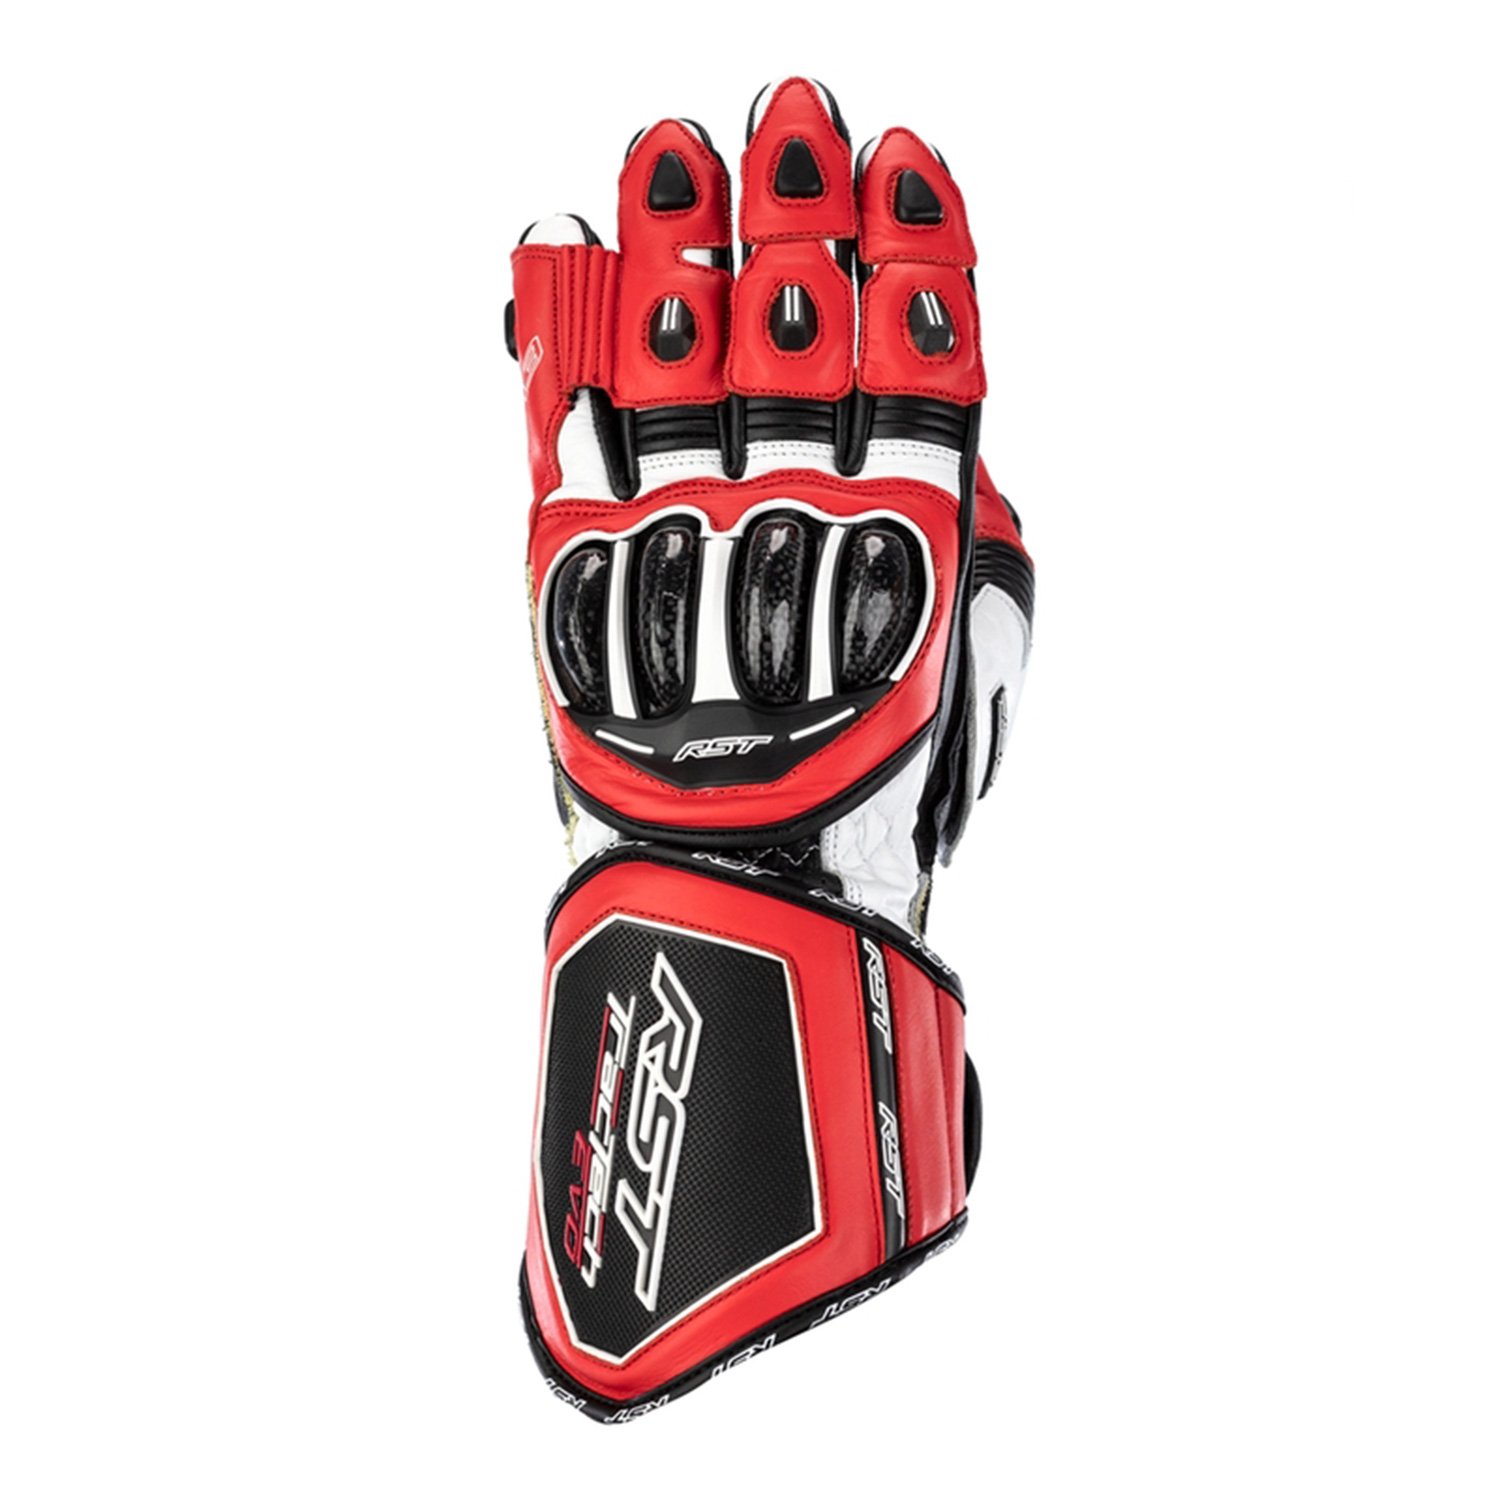 Image of RST Tractech Evo 4 Ce Mens Glove Rouge Noir Blanc Gants Taille 8